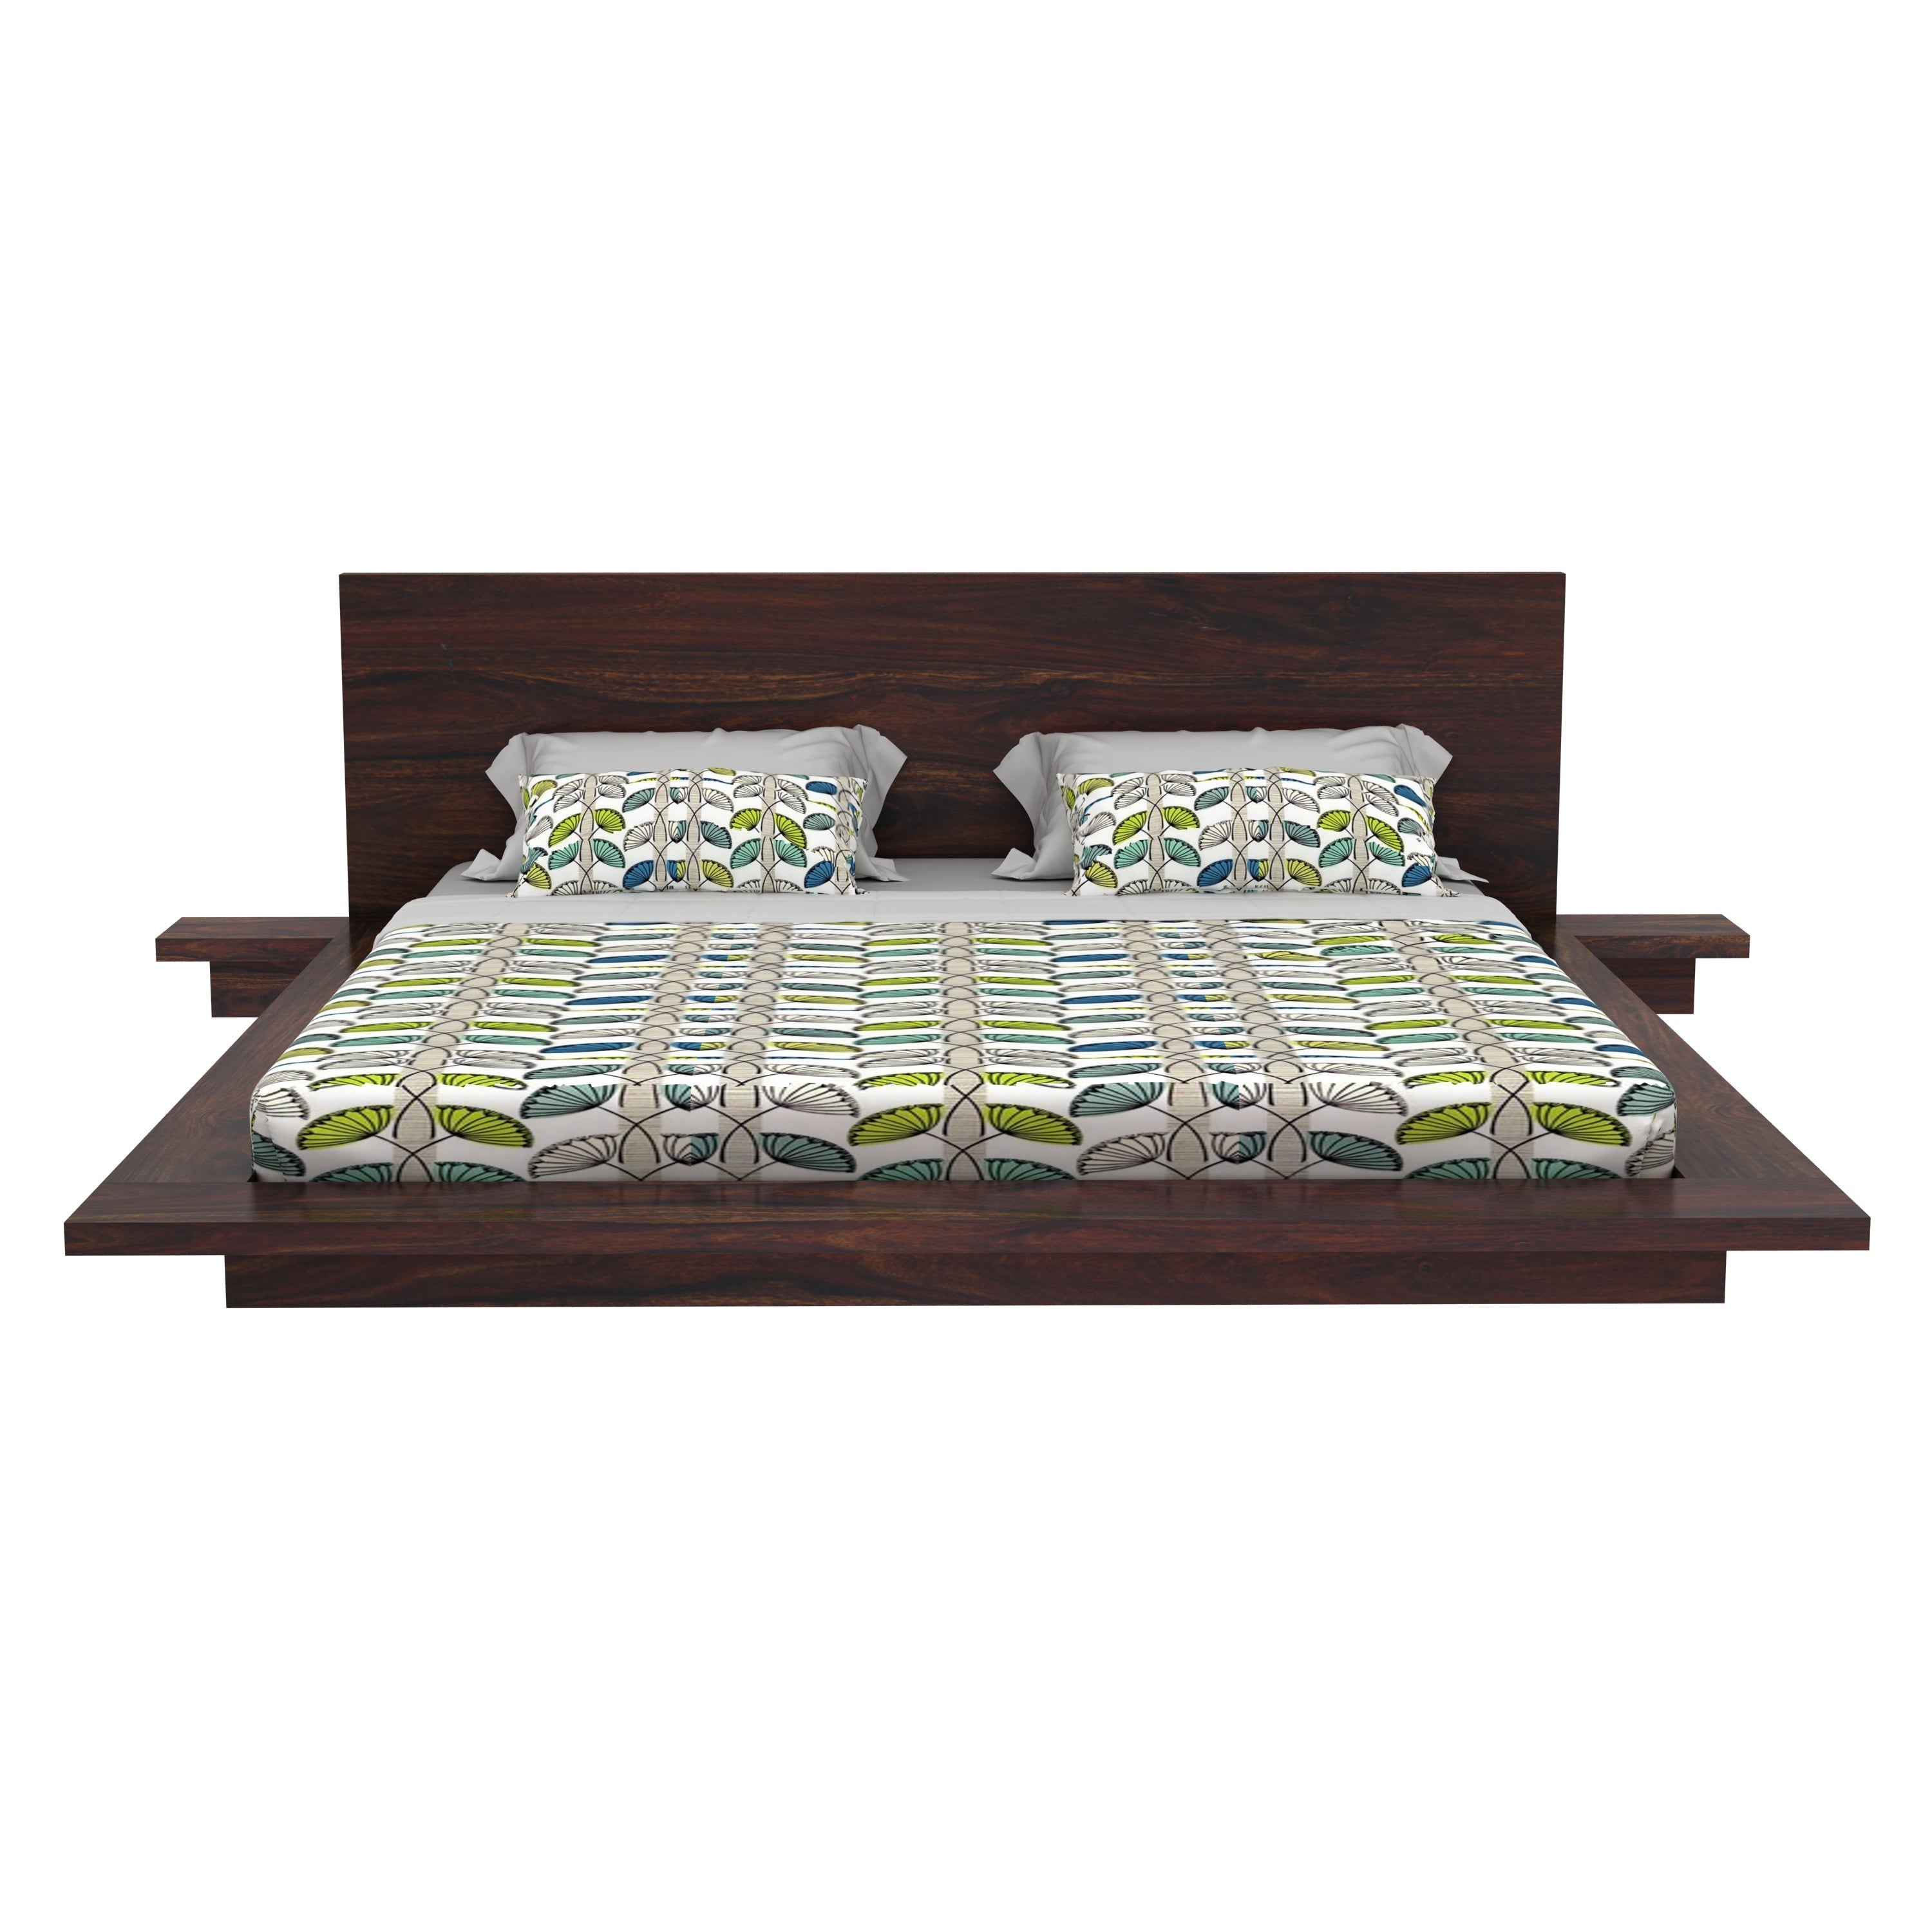 Woodora Solid Sheesham Wood Bed With Bedside Tables (Queen Size, Walnut Finish)